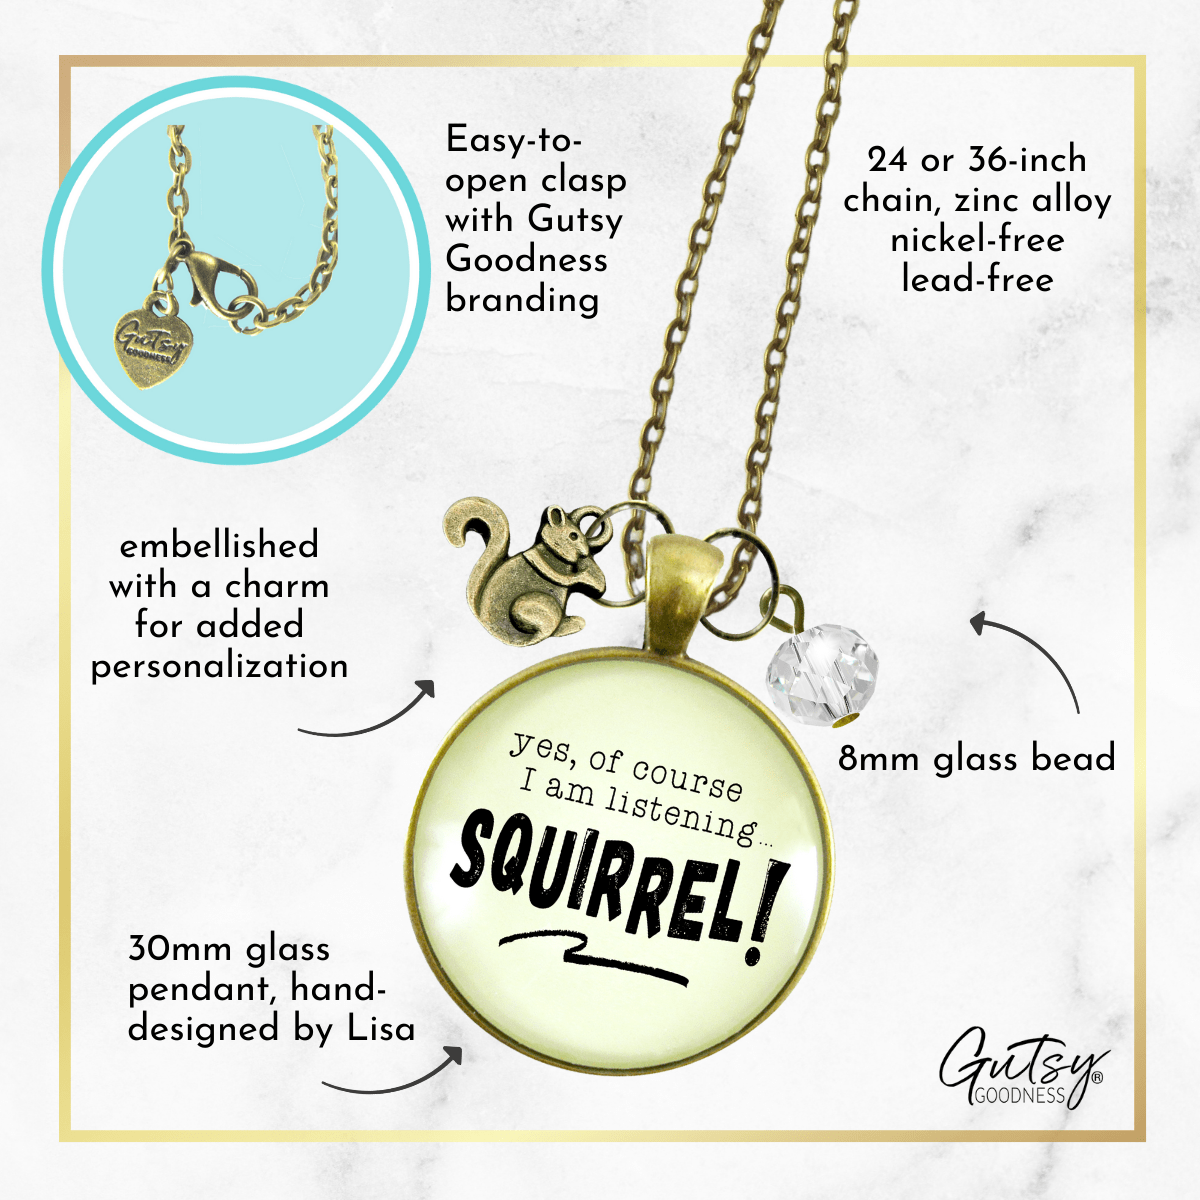 Gutsy Goodness Squirrel Necklace ADHD Funny Listening Focus Jewelry Animal Charm - Gutsy Goodness Handmade Jewelry;Squirrel Necklace Adhd Funny Listening Focus Jewelry Animal Charm - Gutsy Goodness Handmade Jewelry Gifts